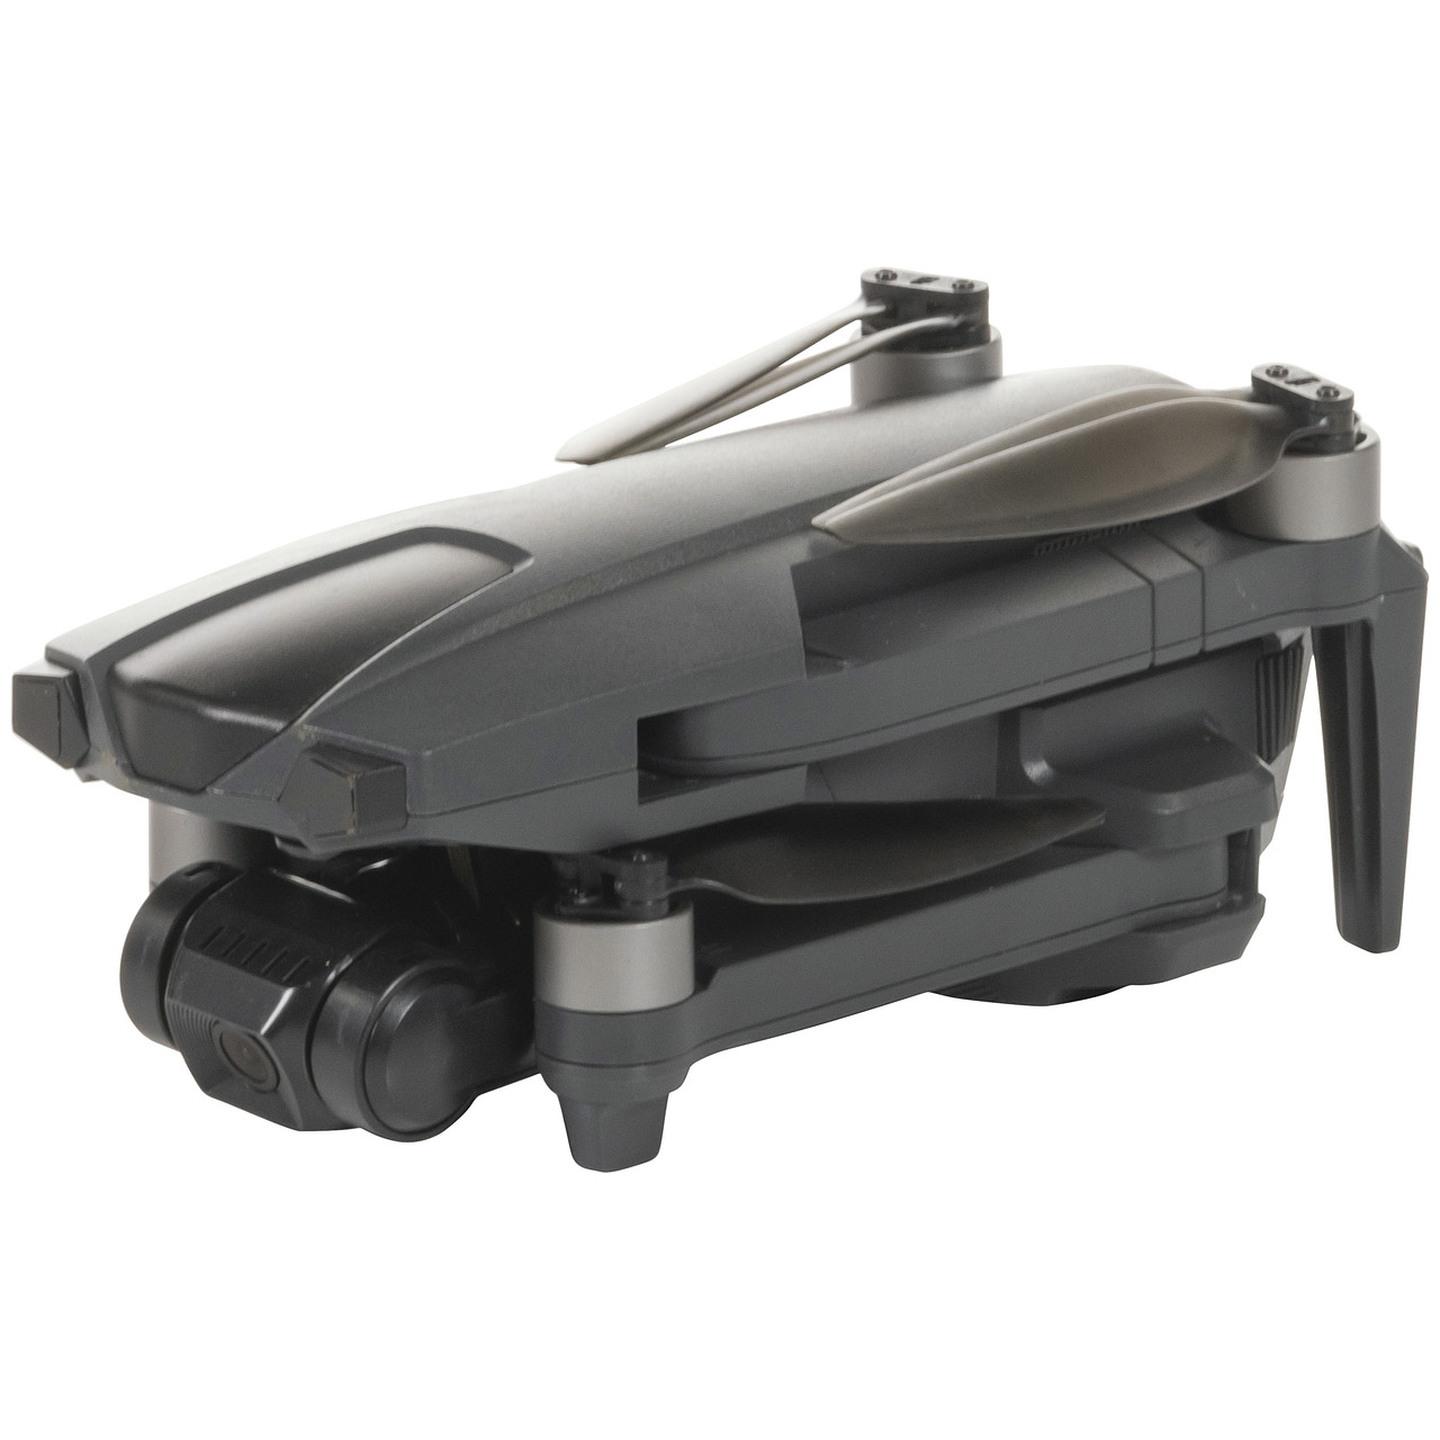 Bugs R/C Foldable Drone with 4K 3-Axis Gimbal Camera